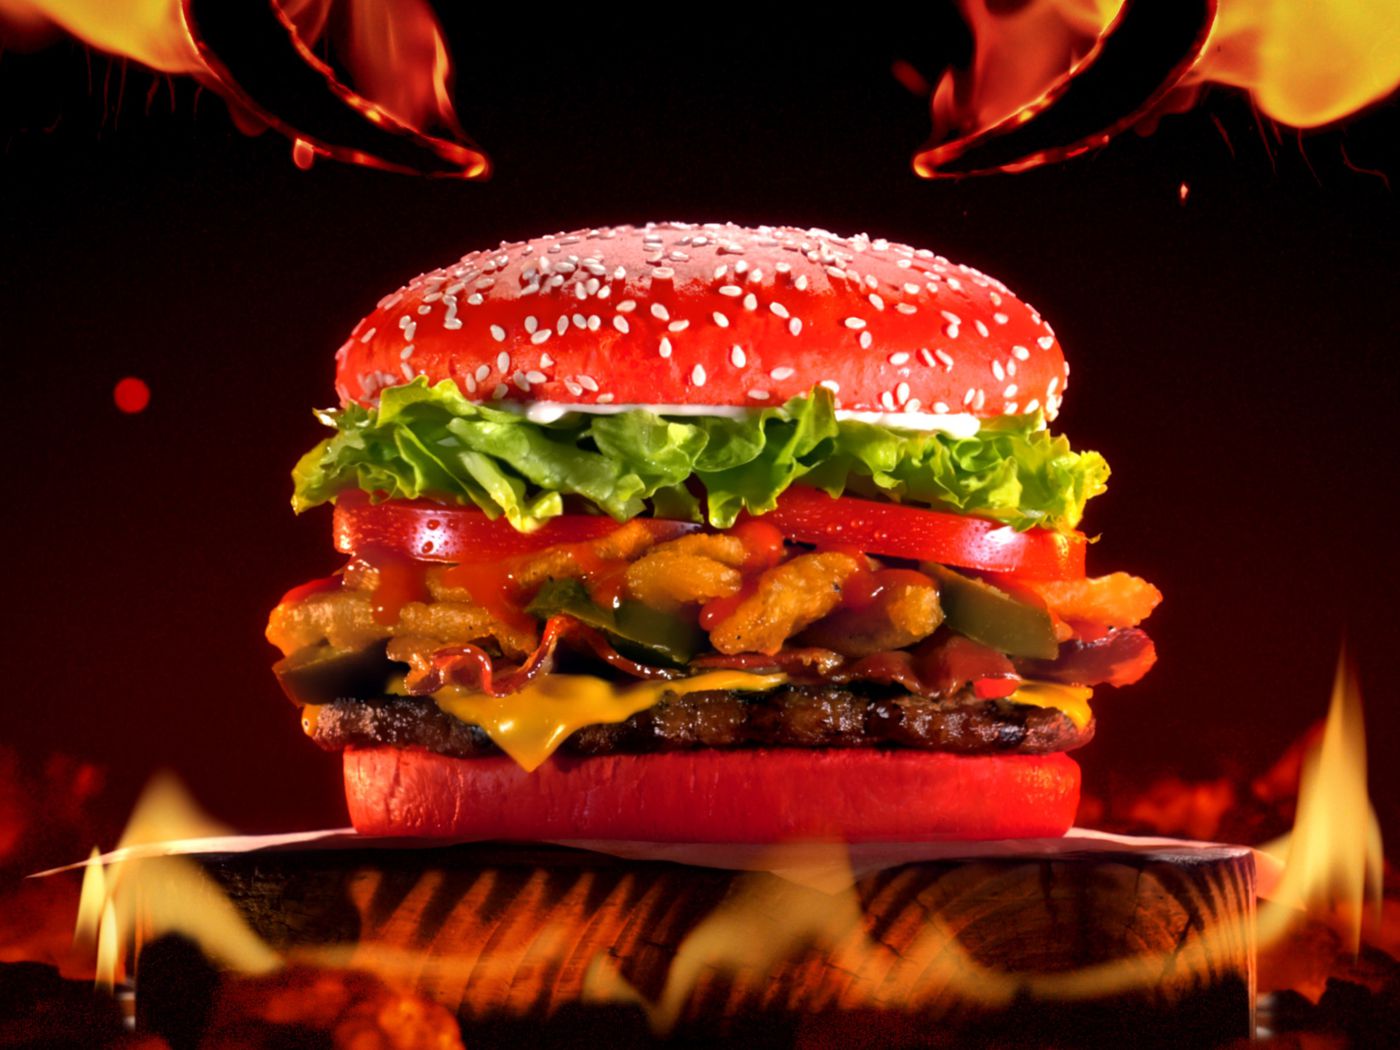 Burger King Whopper 35 per cent smaller than portrayed in ads lawsuit says   The Independent